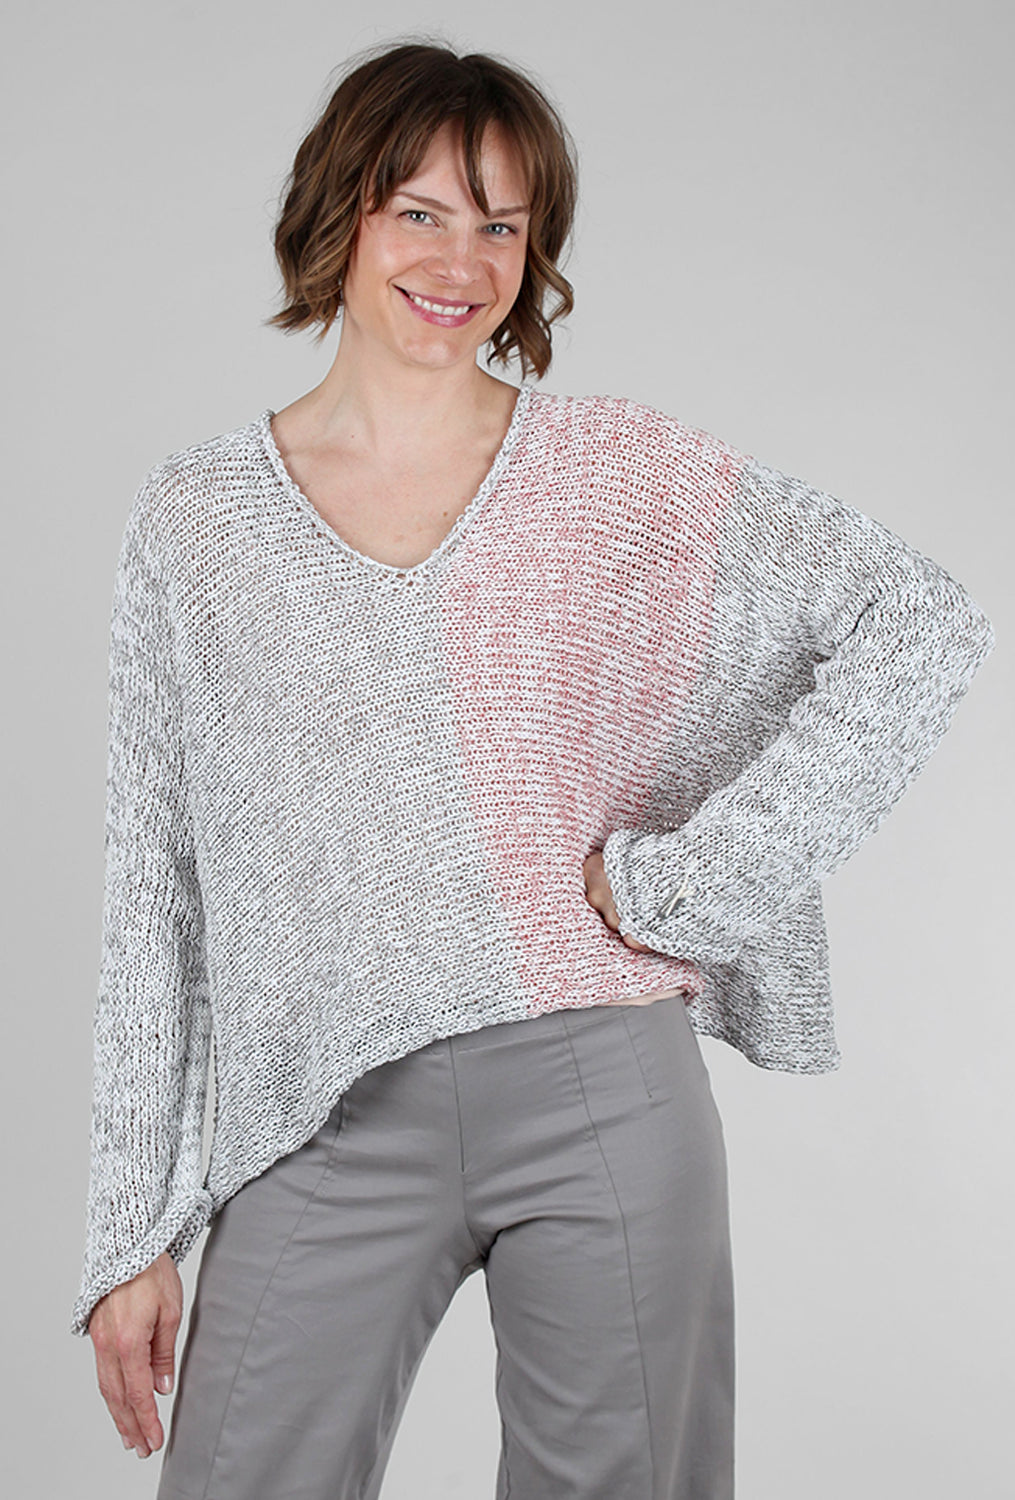 Skif Mixed Knits Vee Pullover, Gray/Red Mix 